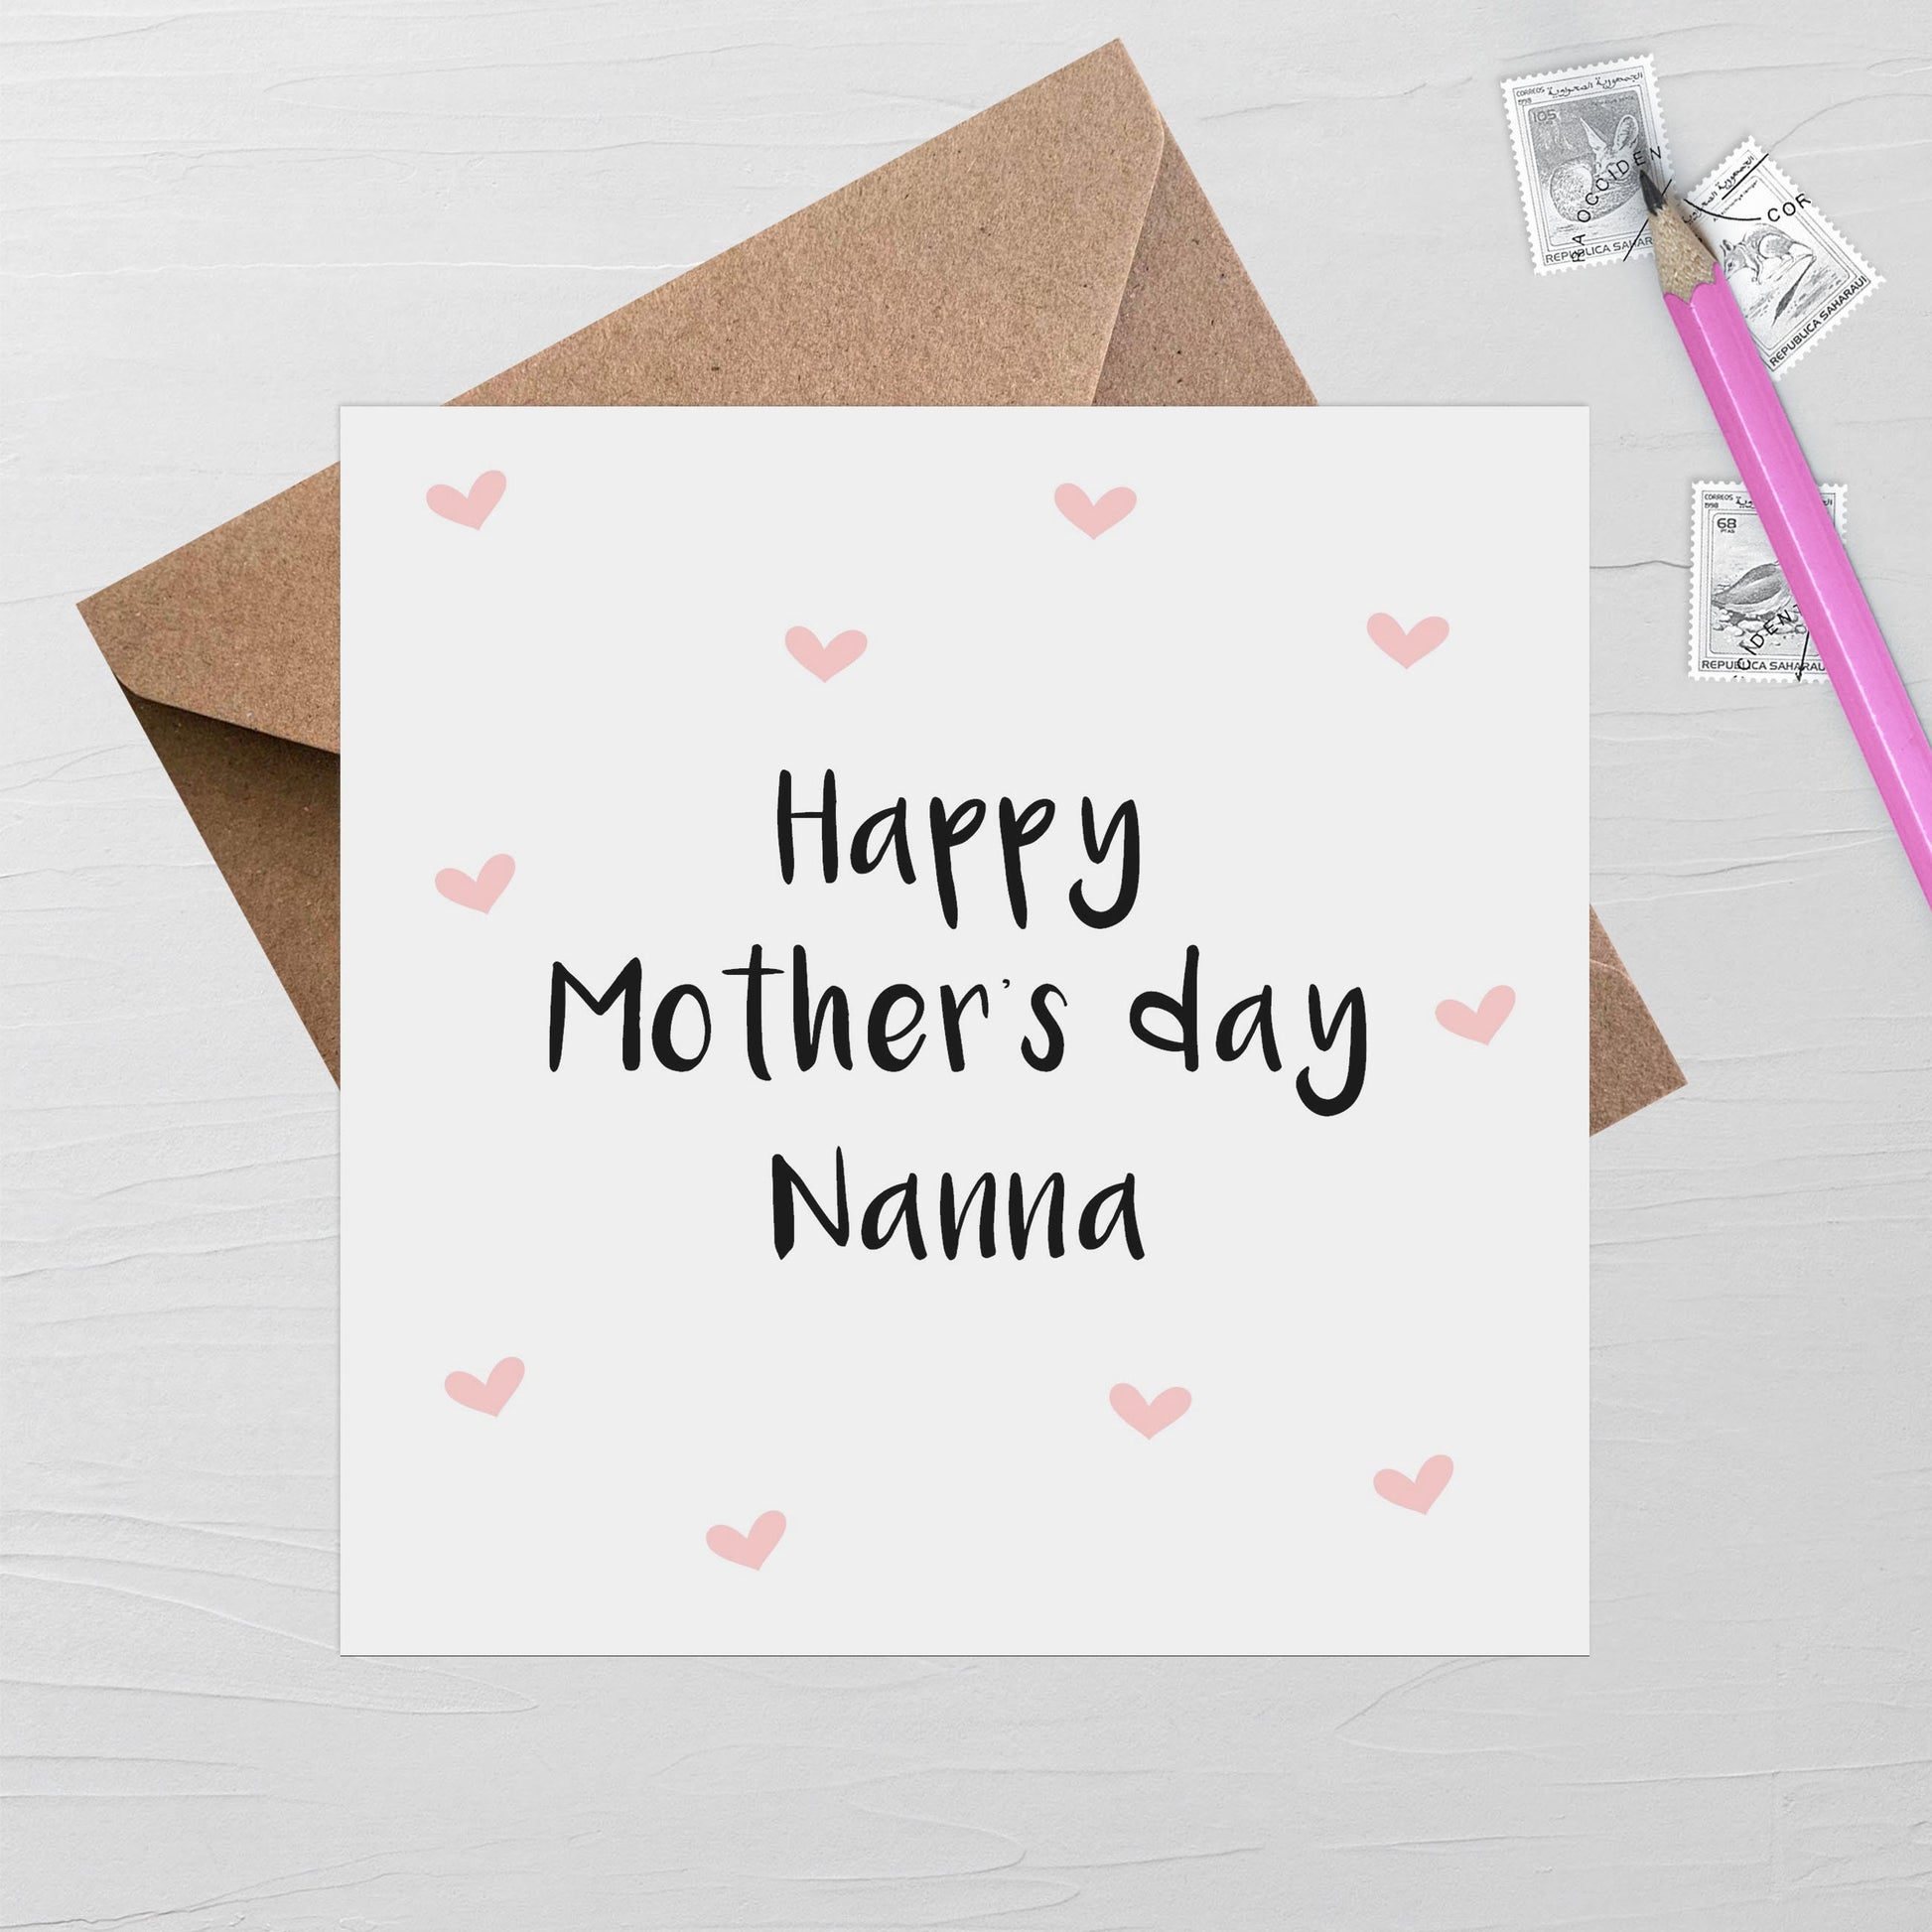 Happy Mother's Day Nanna, Pink Heart Card